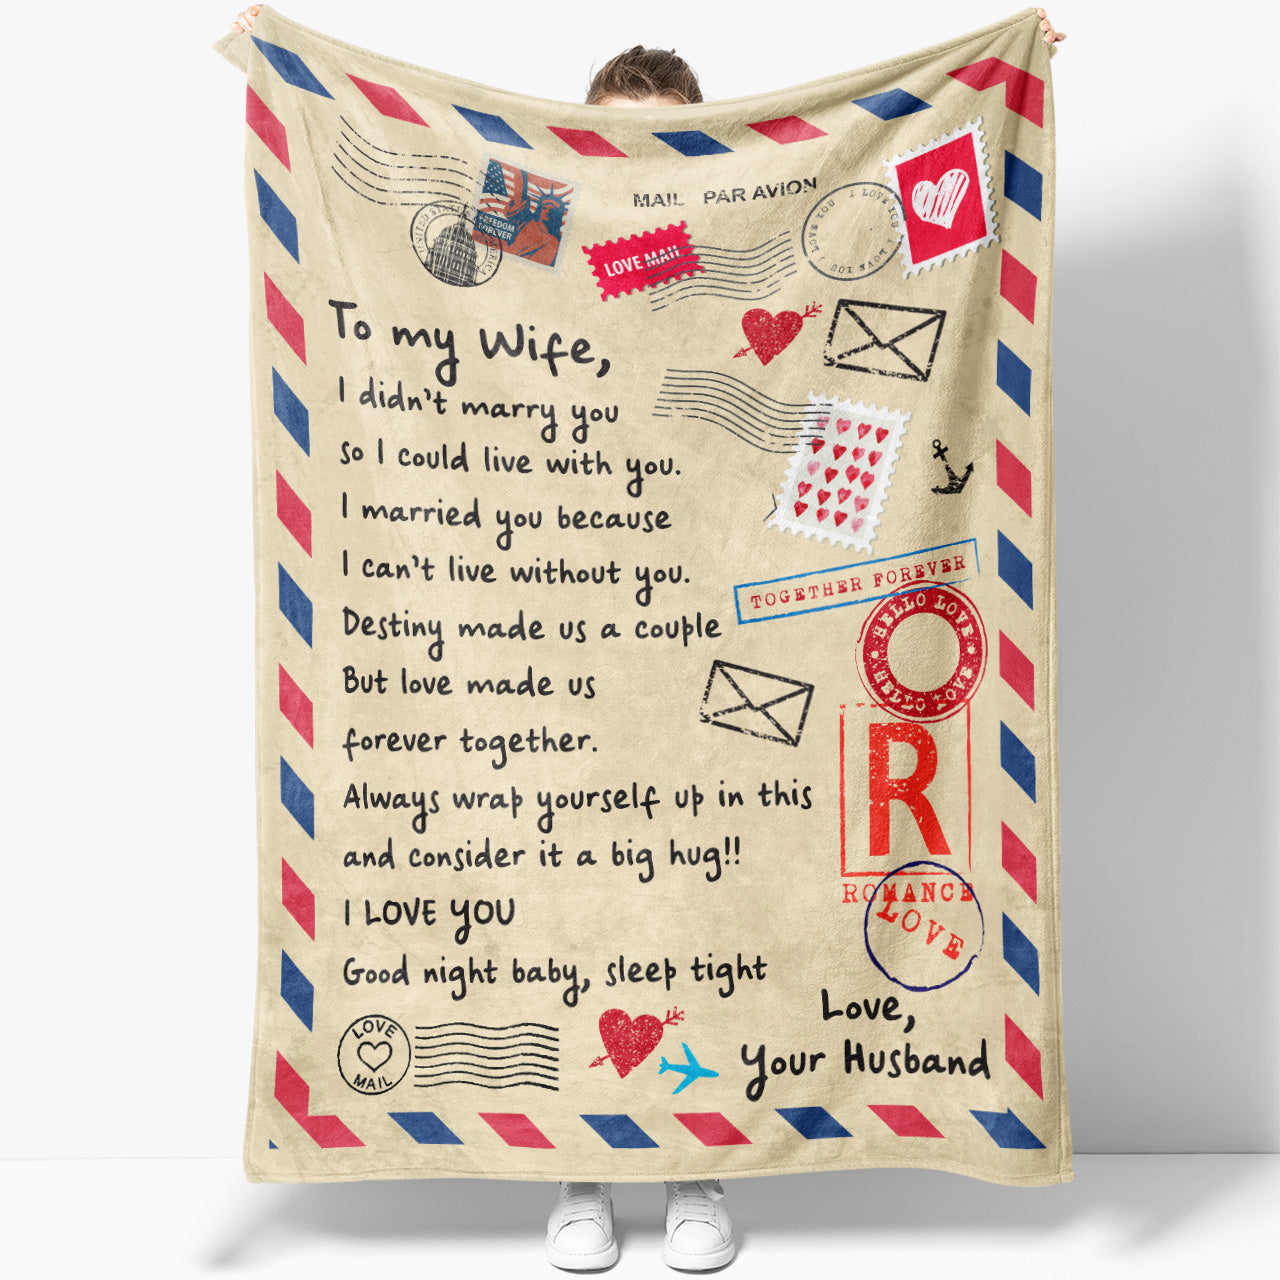 Personalized Blanket Gift For Her, Birthday Gifts For Her, Unique Gifts For Wife, I Didnt Marry You